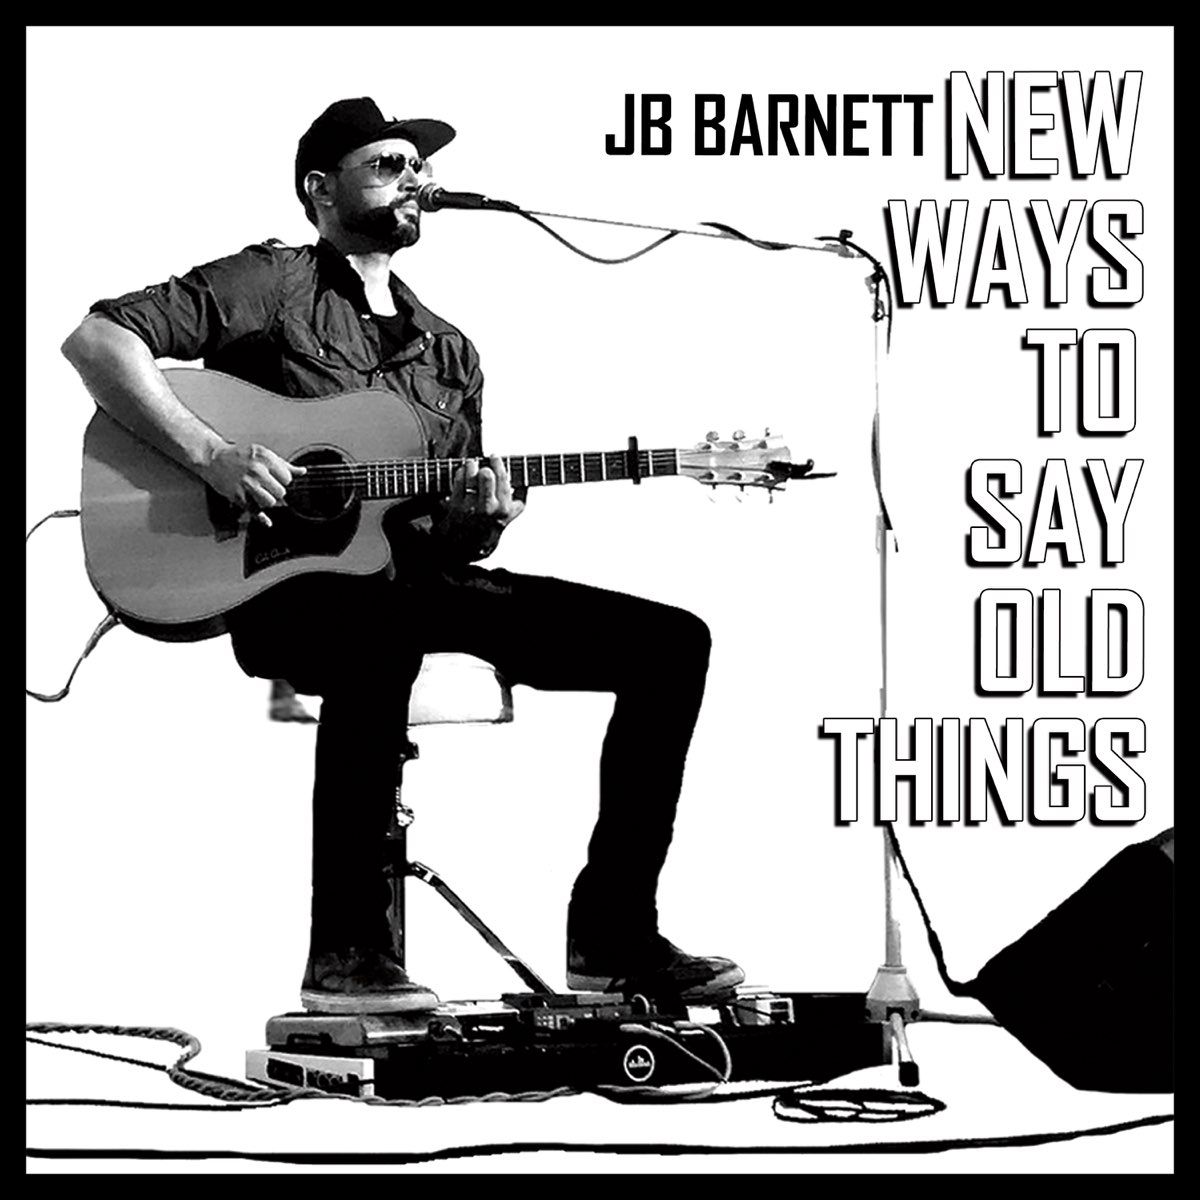 ‎New Ways to Say Old Things - Album by JB Barnett - Apple Music